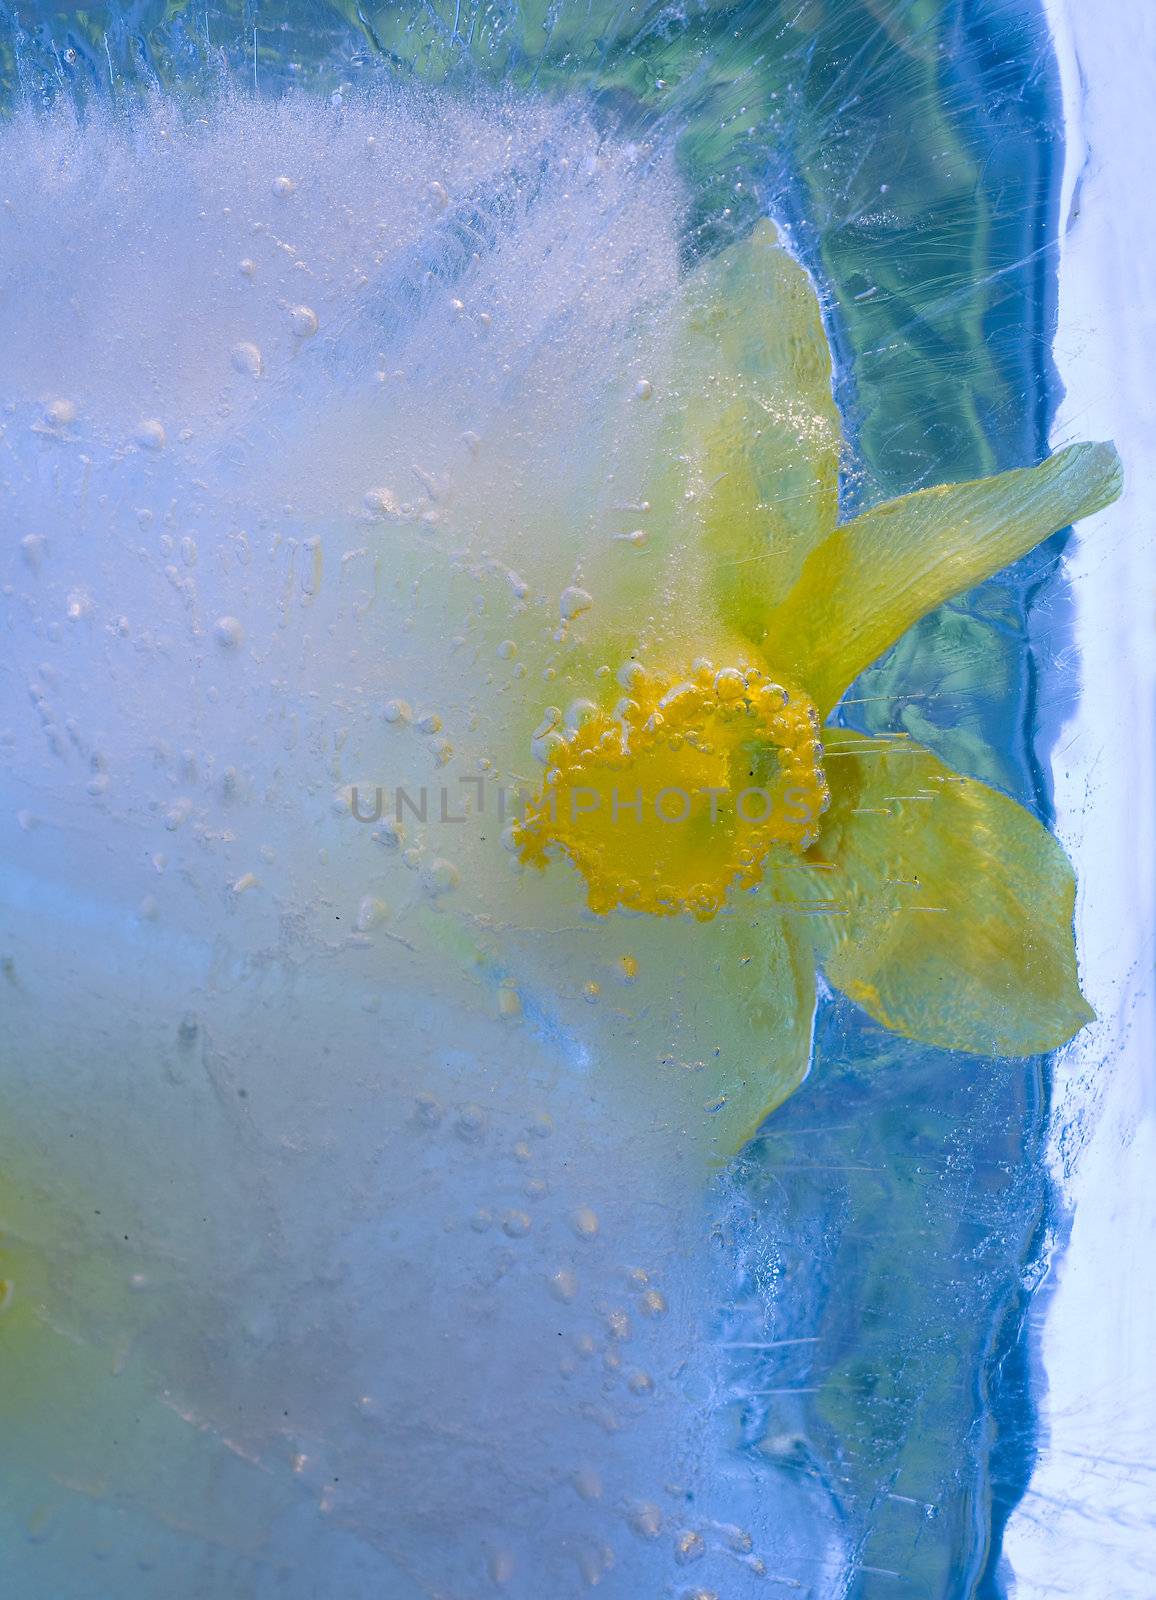  Frozen narcissus flower by foryouinf